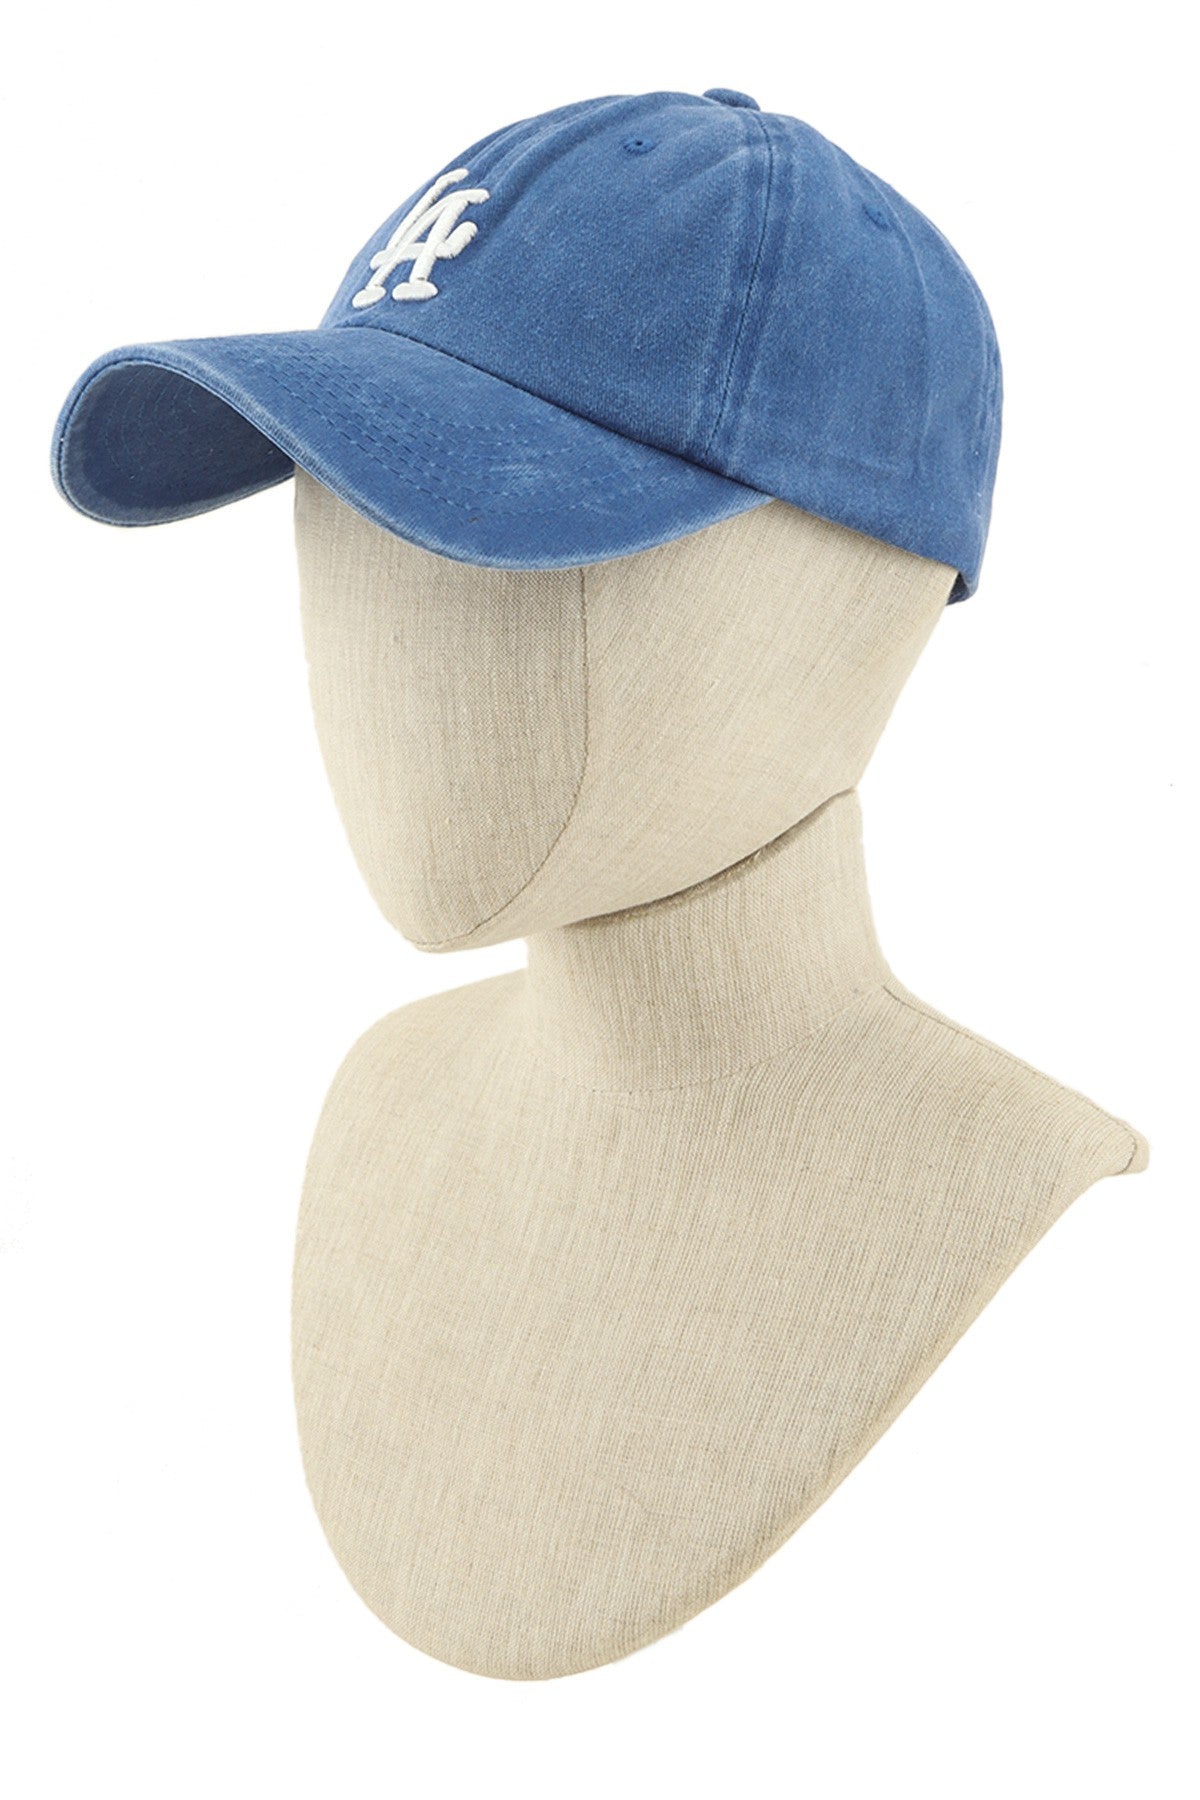 THE LOS ANGELES BASEBALL HAT IN ROYAL BLUE